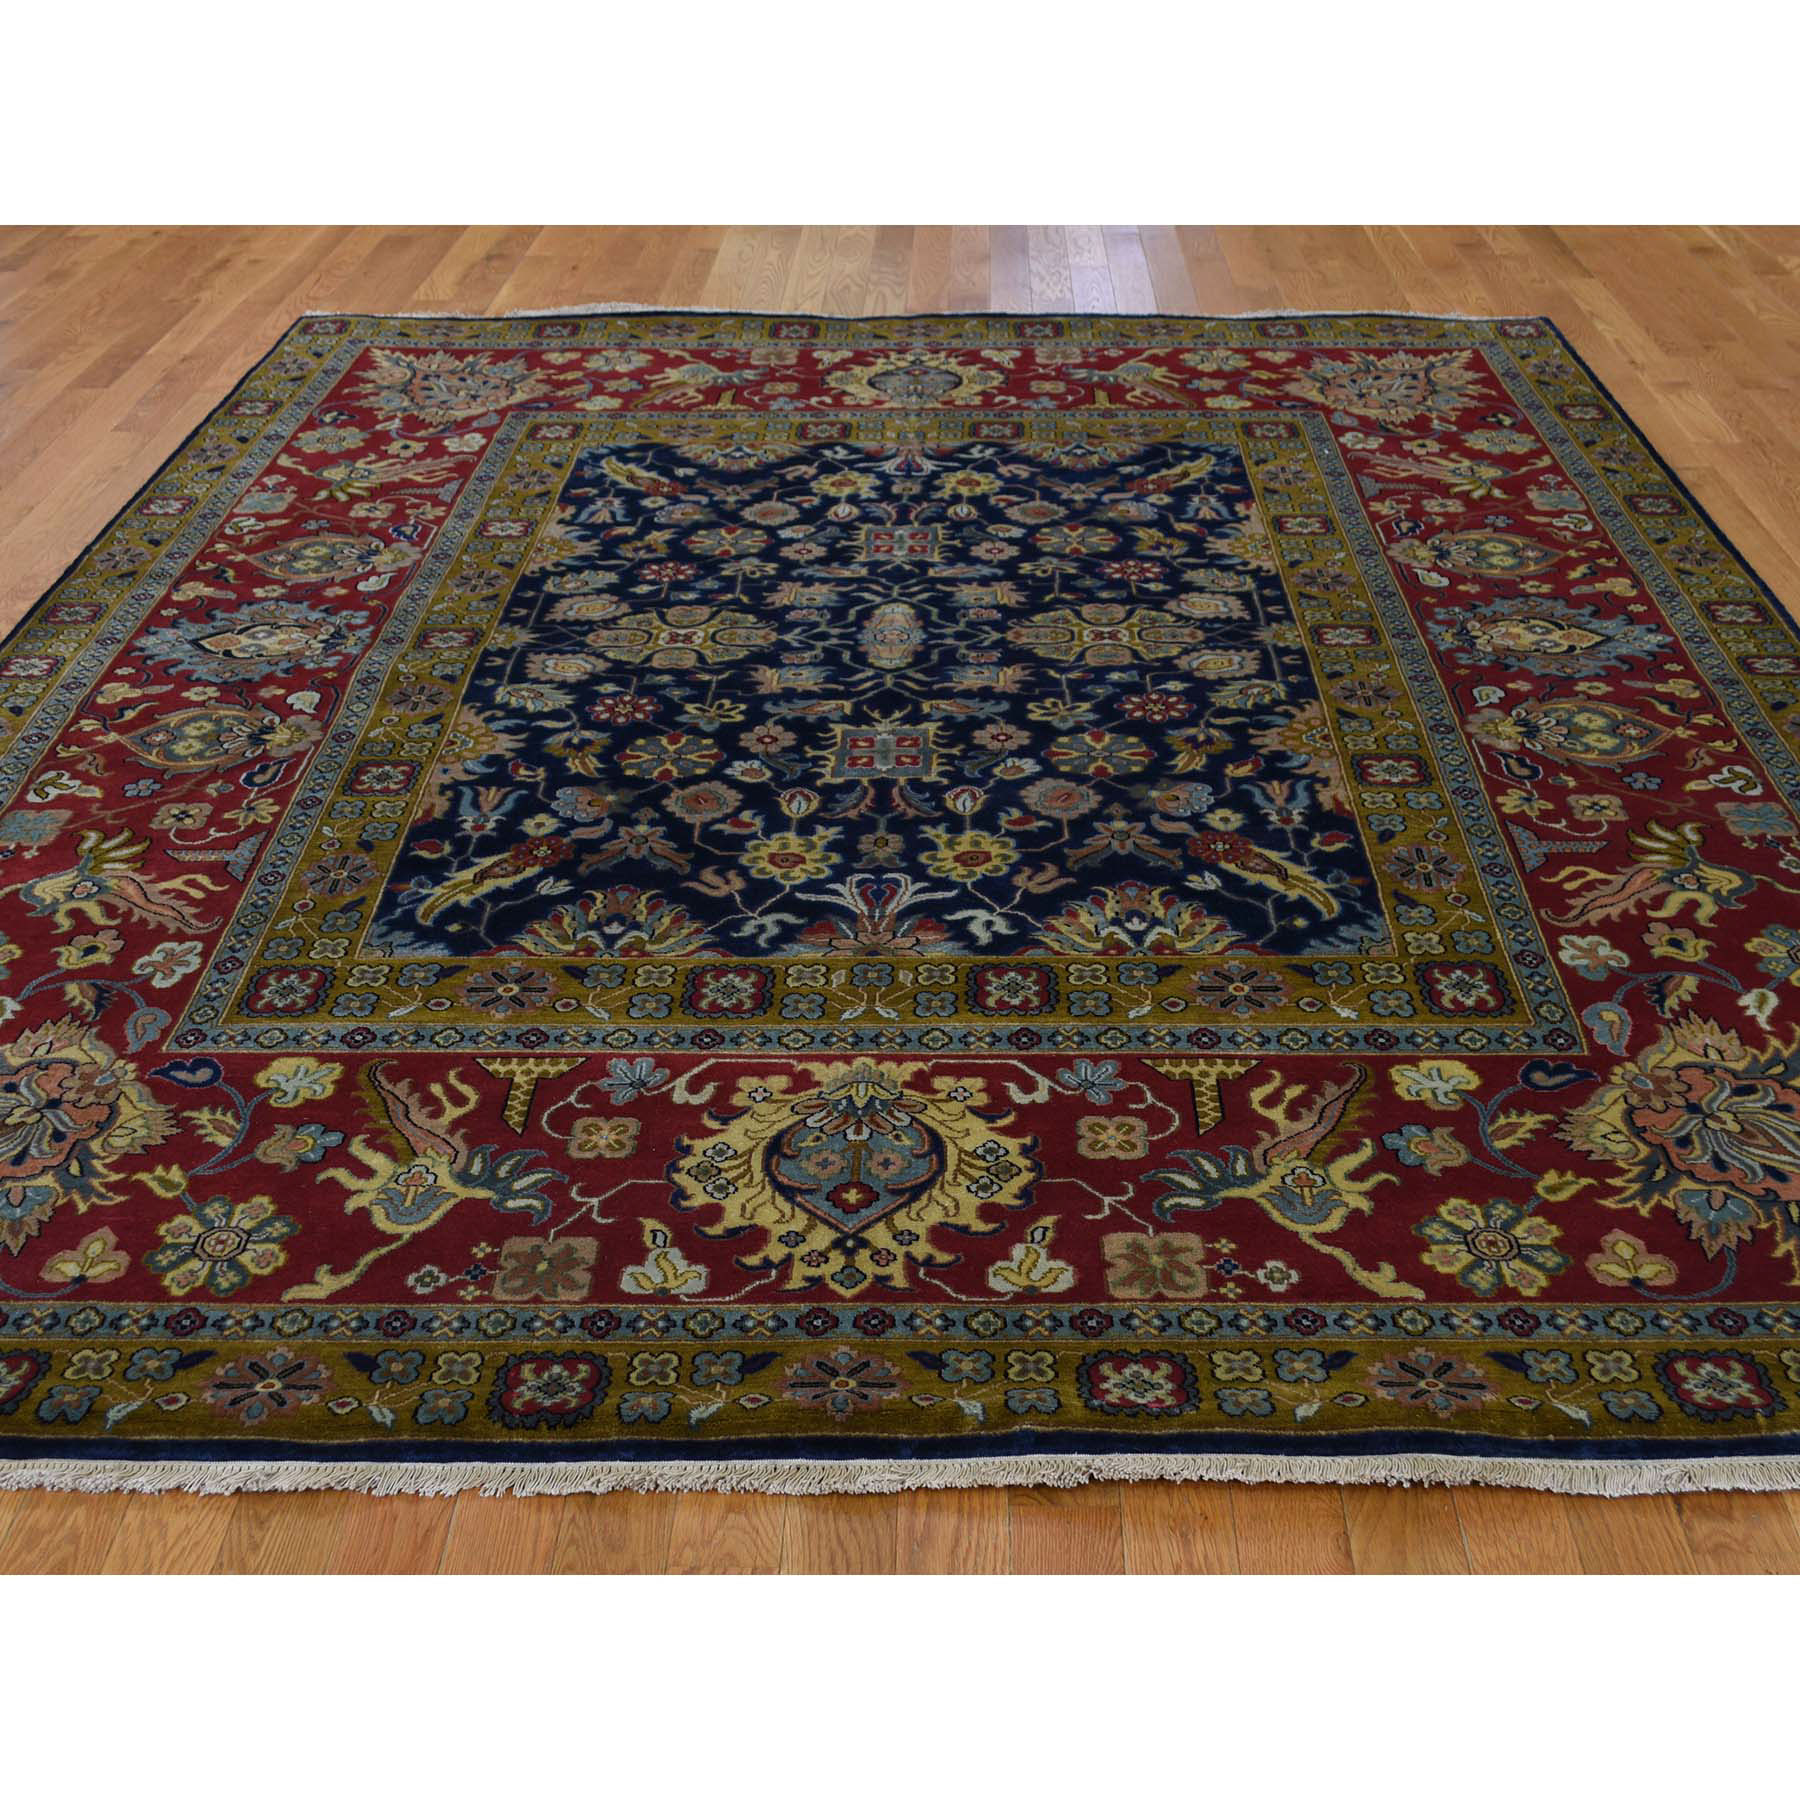 9-1--x12-2-- 300KPSI New Zealand Wool Hand-Knotted Oriental Rug 